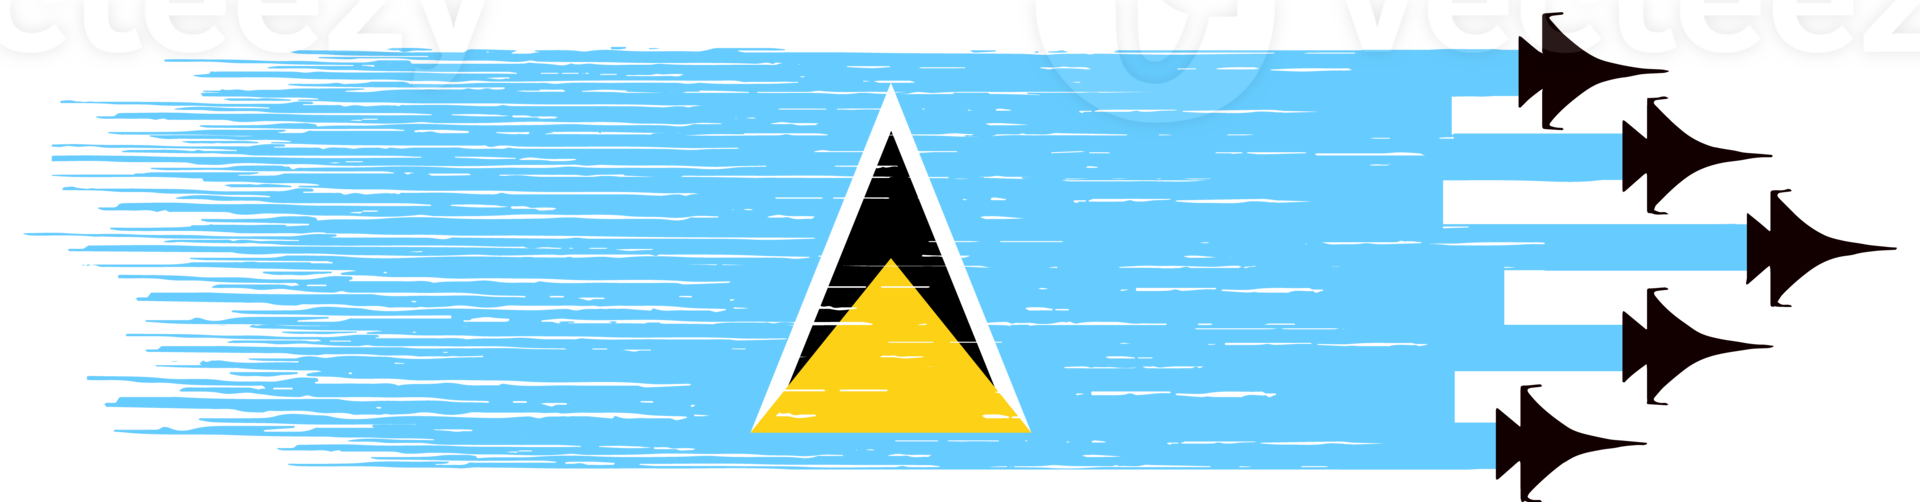 Saint Lucia flag military jets png